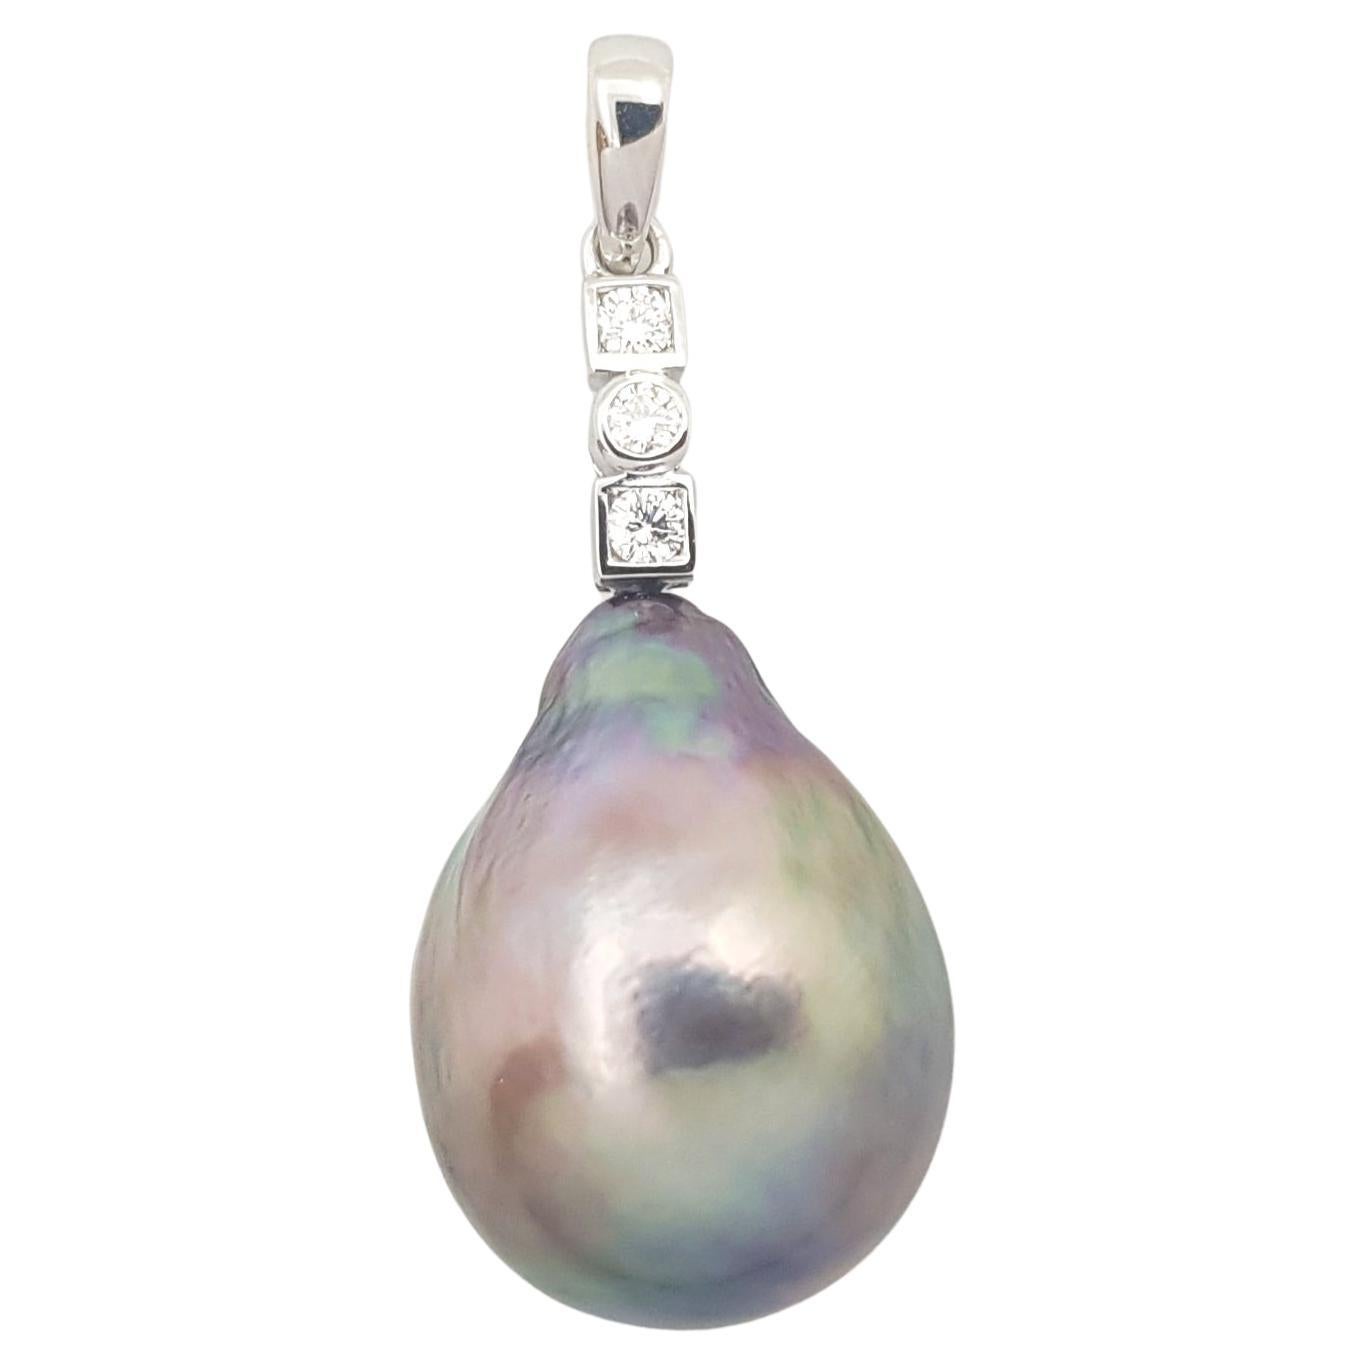 South Sea Pearl with Diamond Pendant set in 18K White Gold Settings